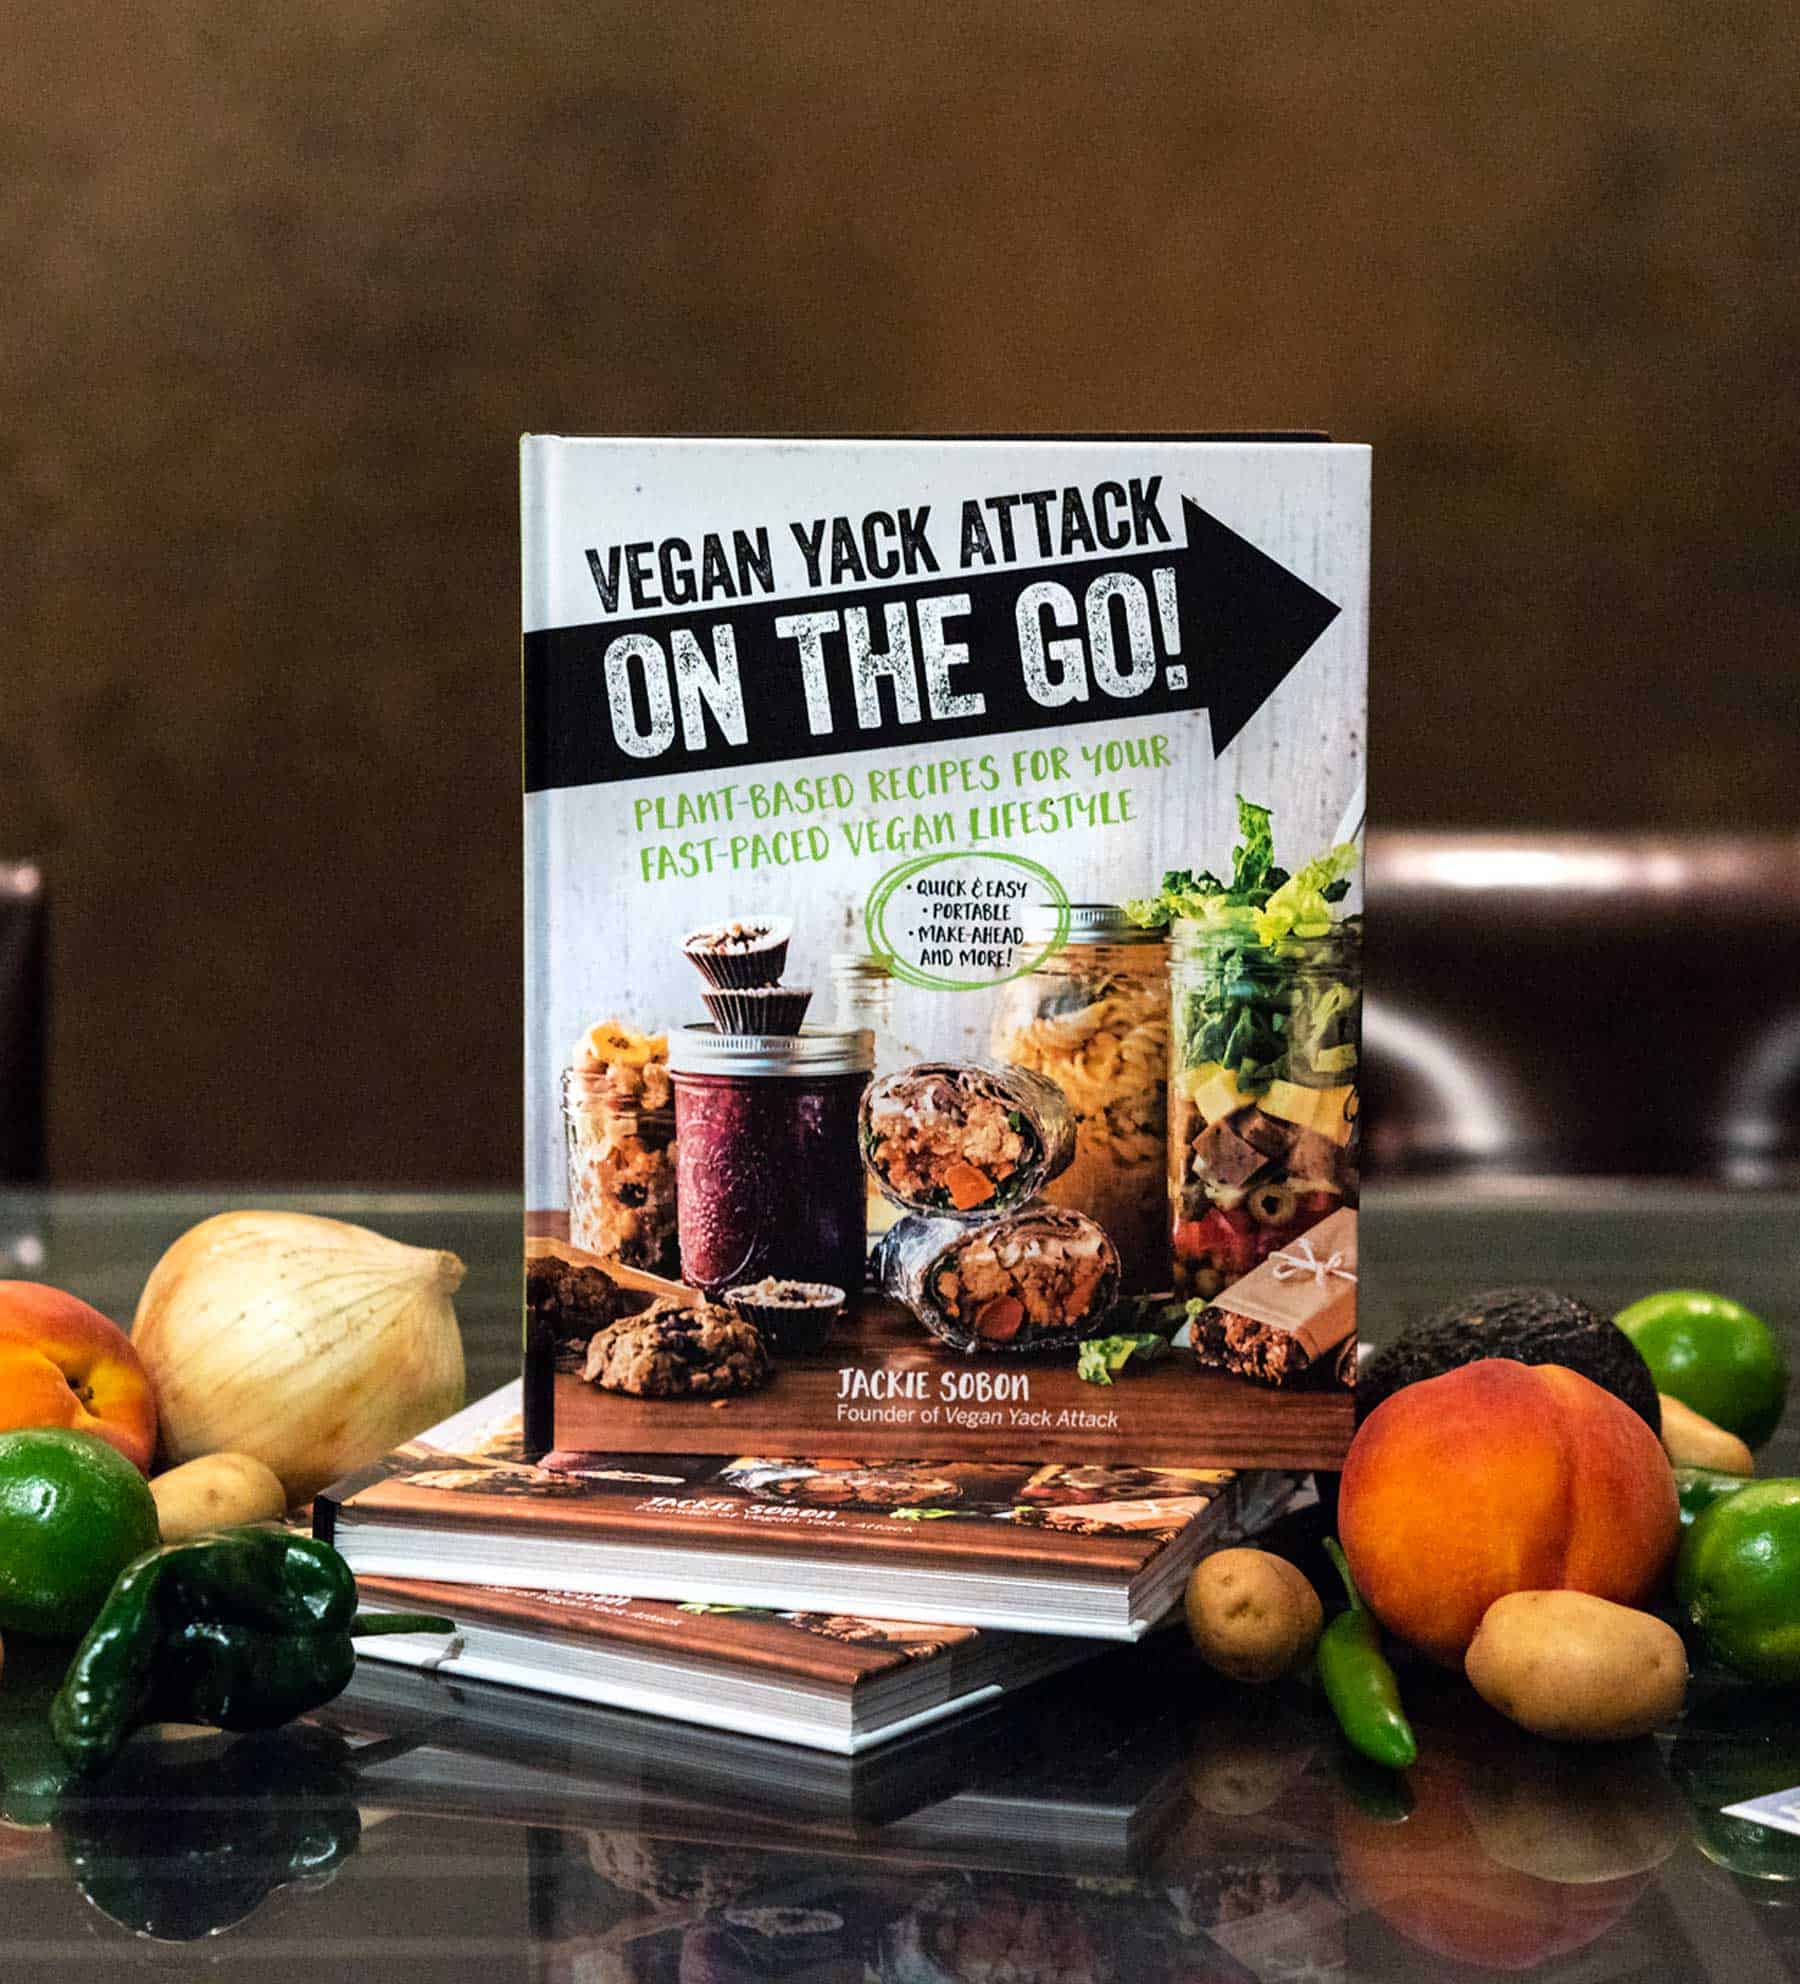 Vegan Yack Attack On the Go! Release + Giveaway